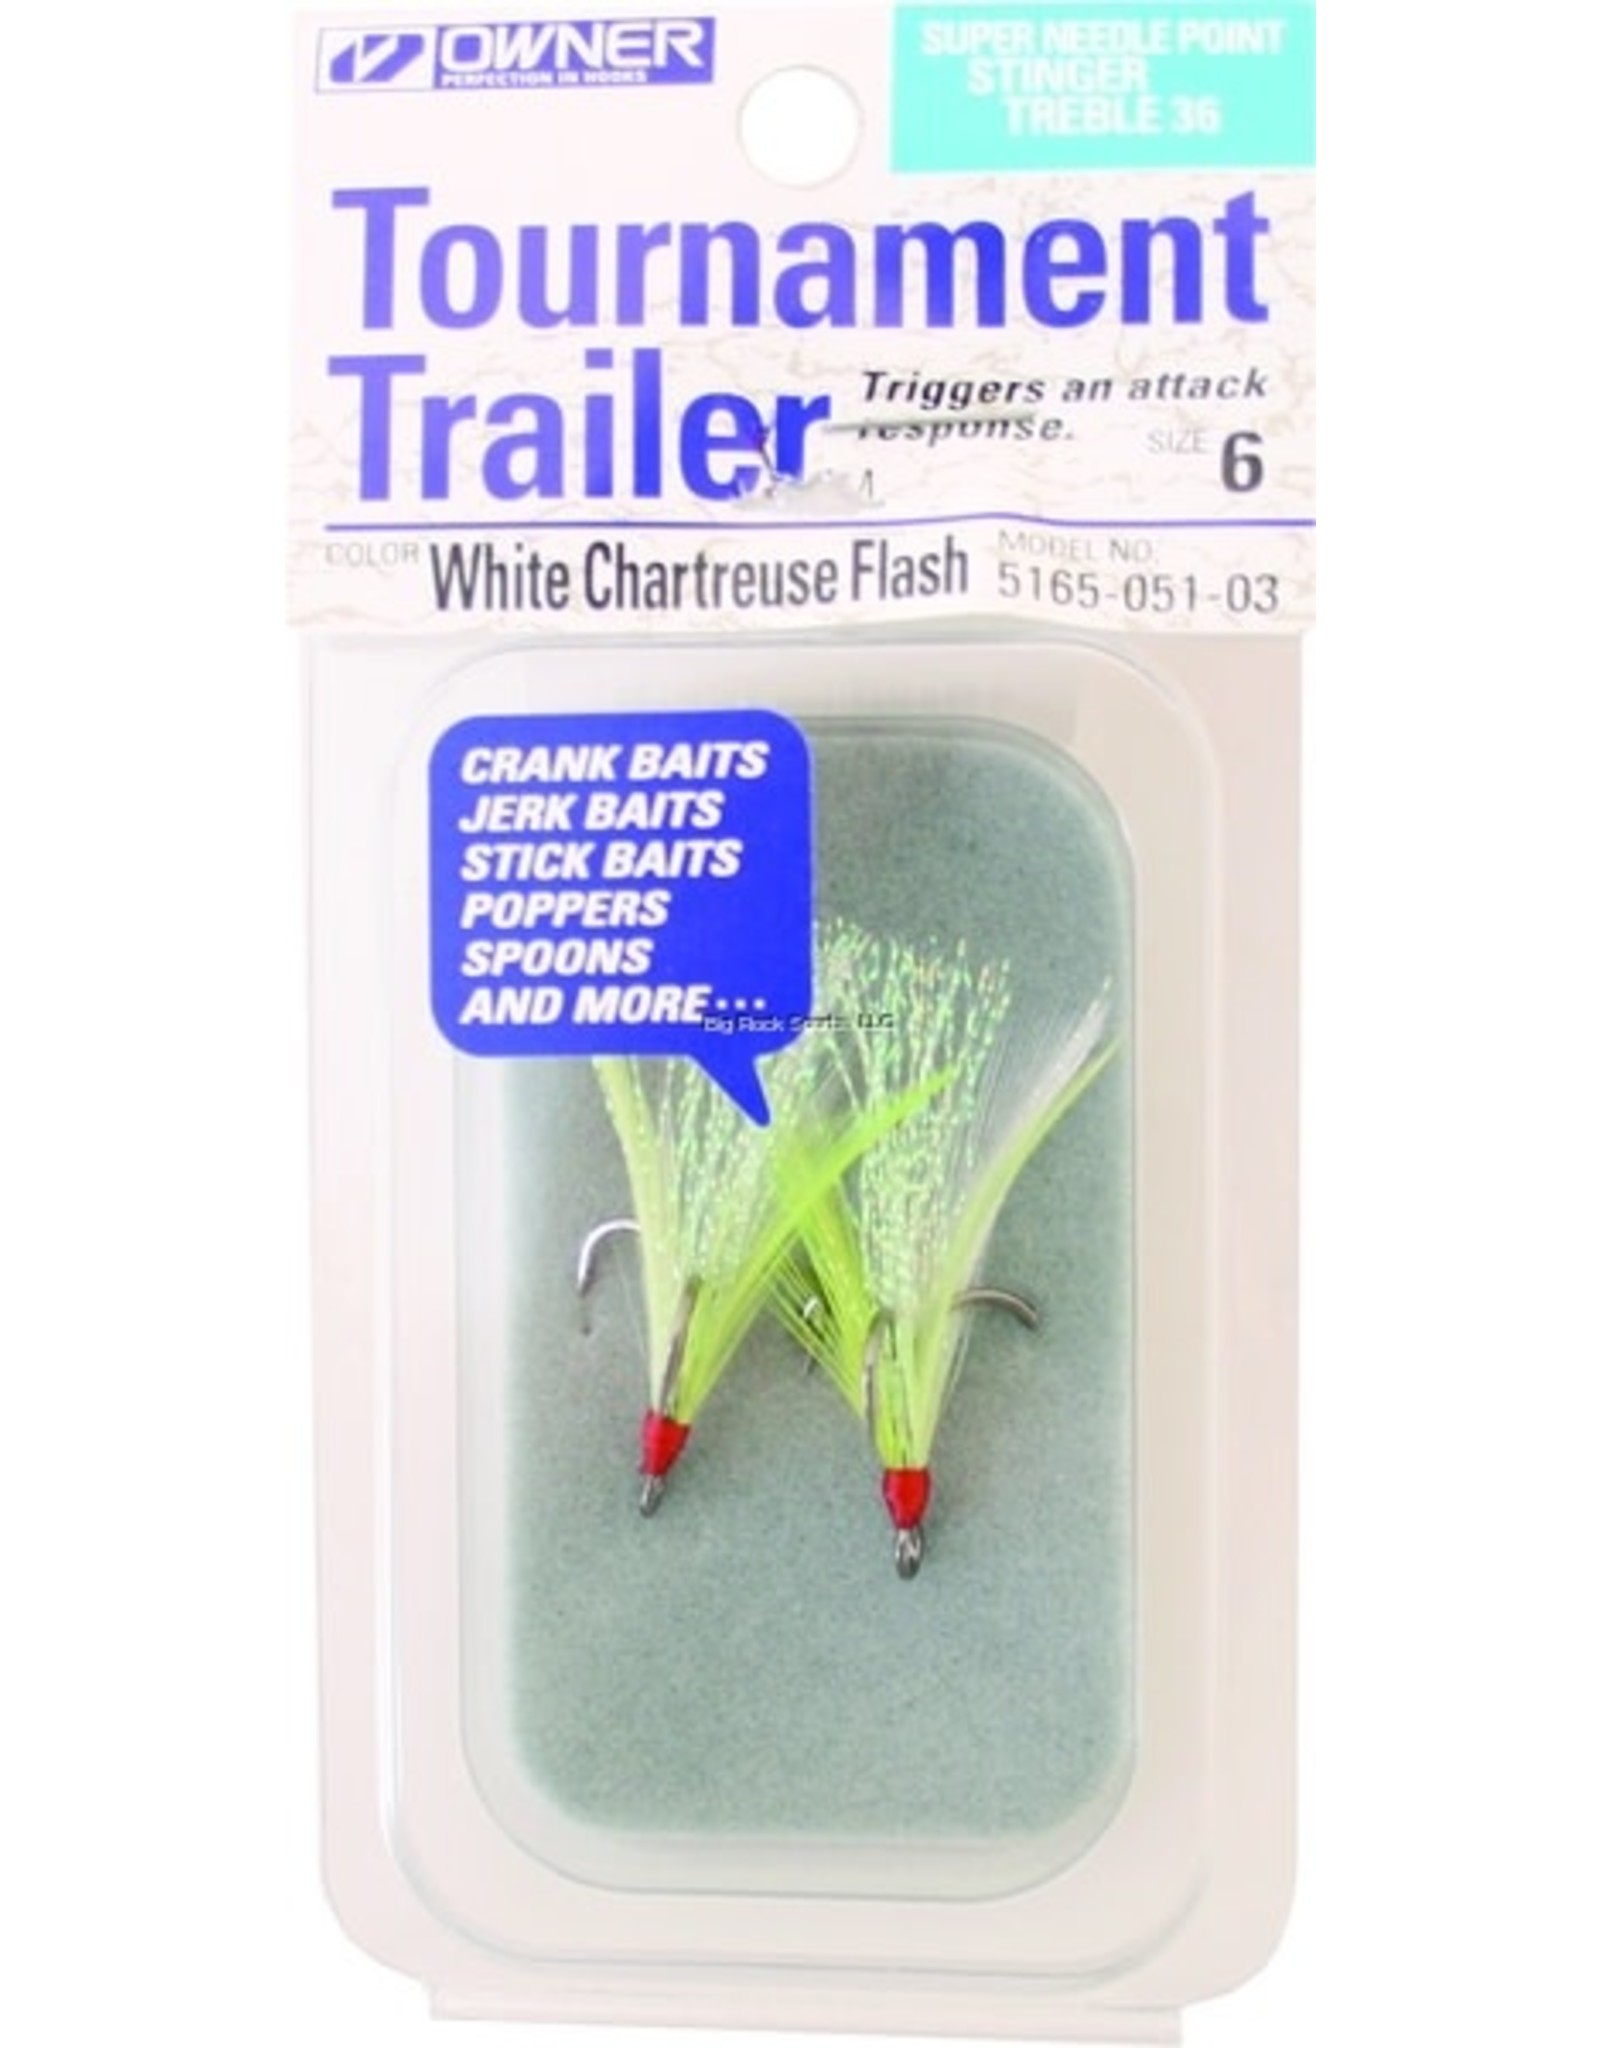 Owner Owner 5165-051-03 Stinger-36 Tournament Trailer Treble Hook, Size 6, Needle Point, Black Chrome, White/Chartreuse Flash Feather, 2 per Pack